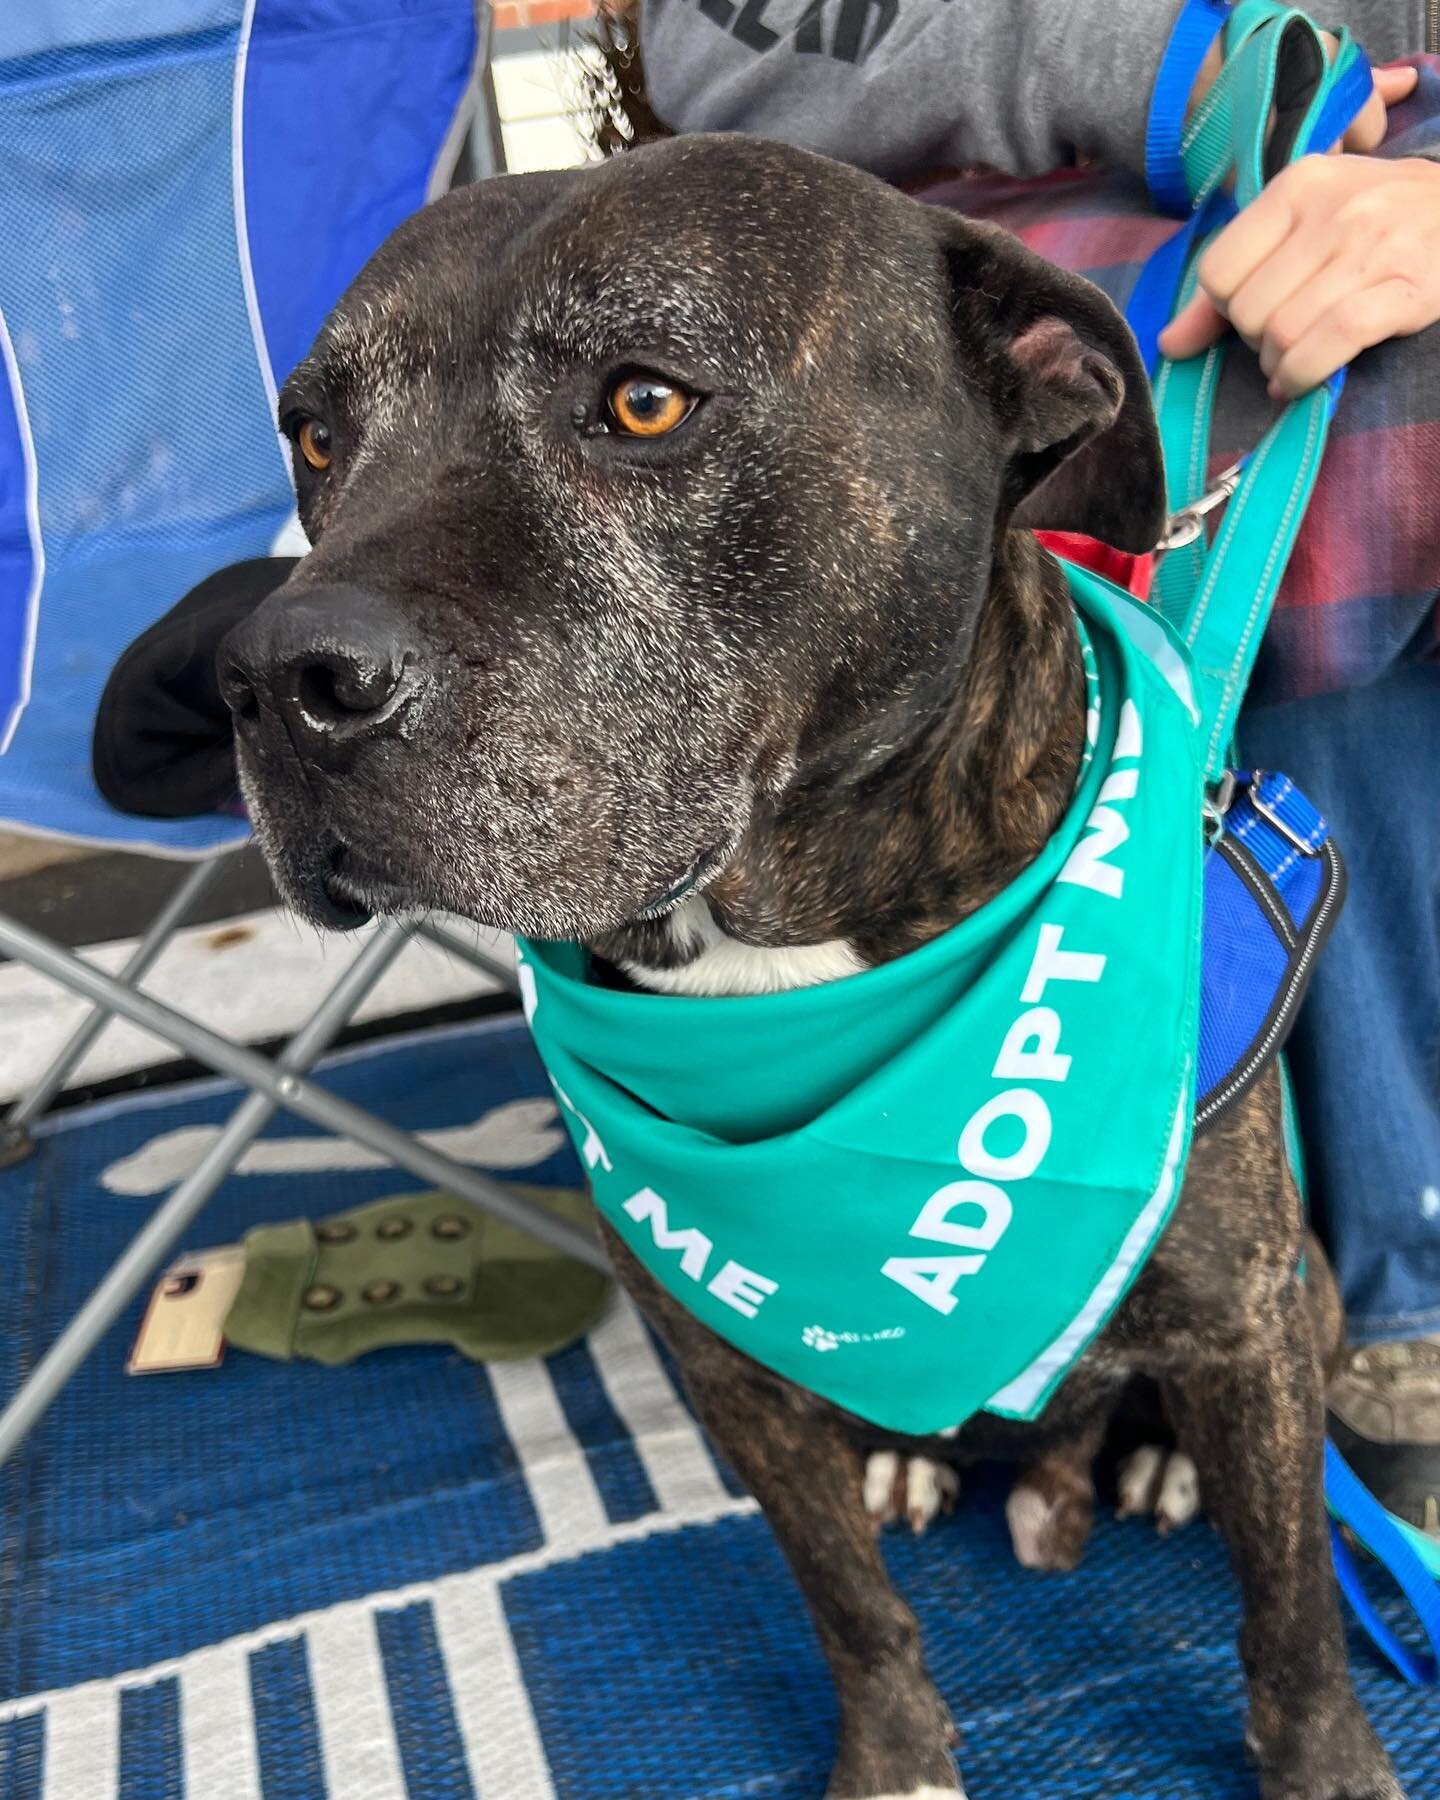 MAS celebrates #NationalRescueDogDay everyday! With your help we&rsquo;ve rescued over 200 pets (dogs, cats and more) since 2019 through Beauty to the Rescue. Visit the MAS Shop today to shop local vendors that give back to animal rescues! 

- Mane A